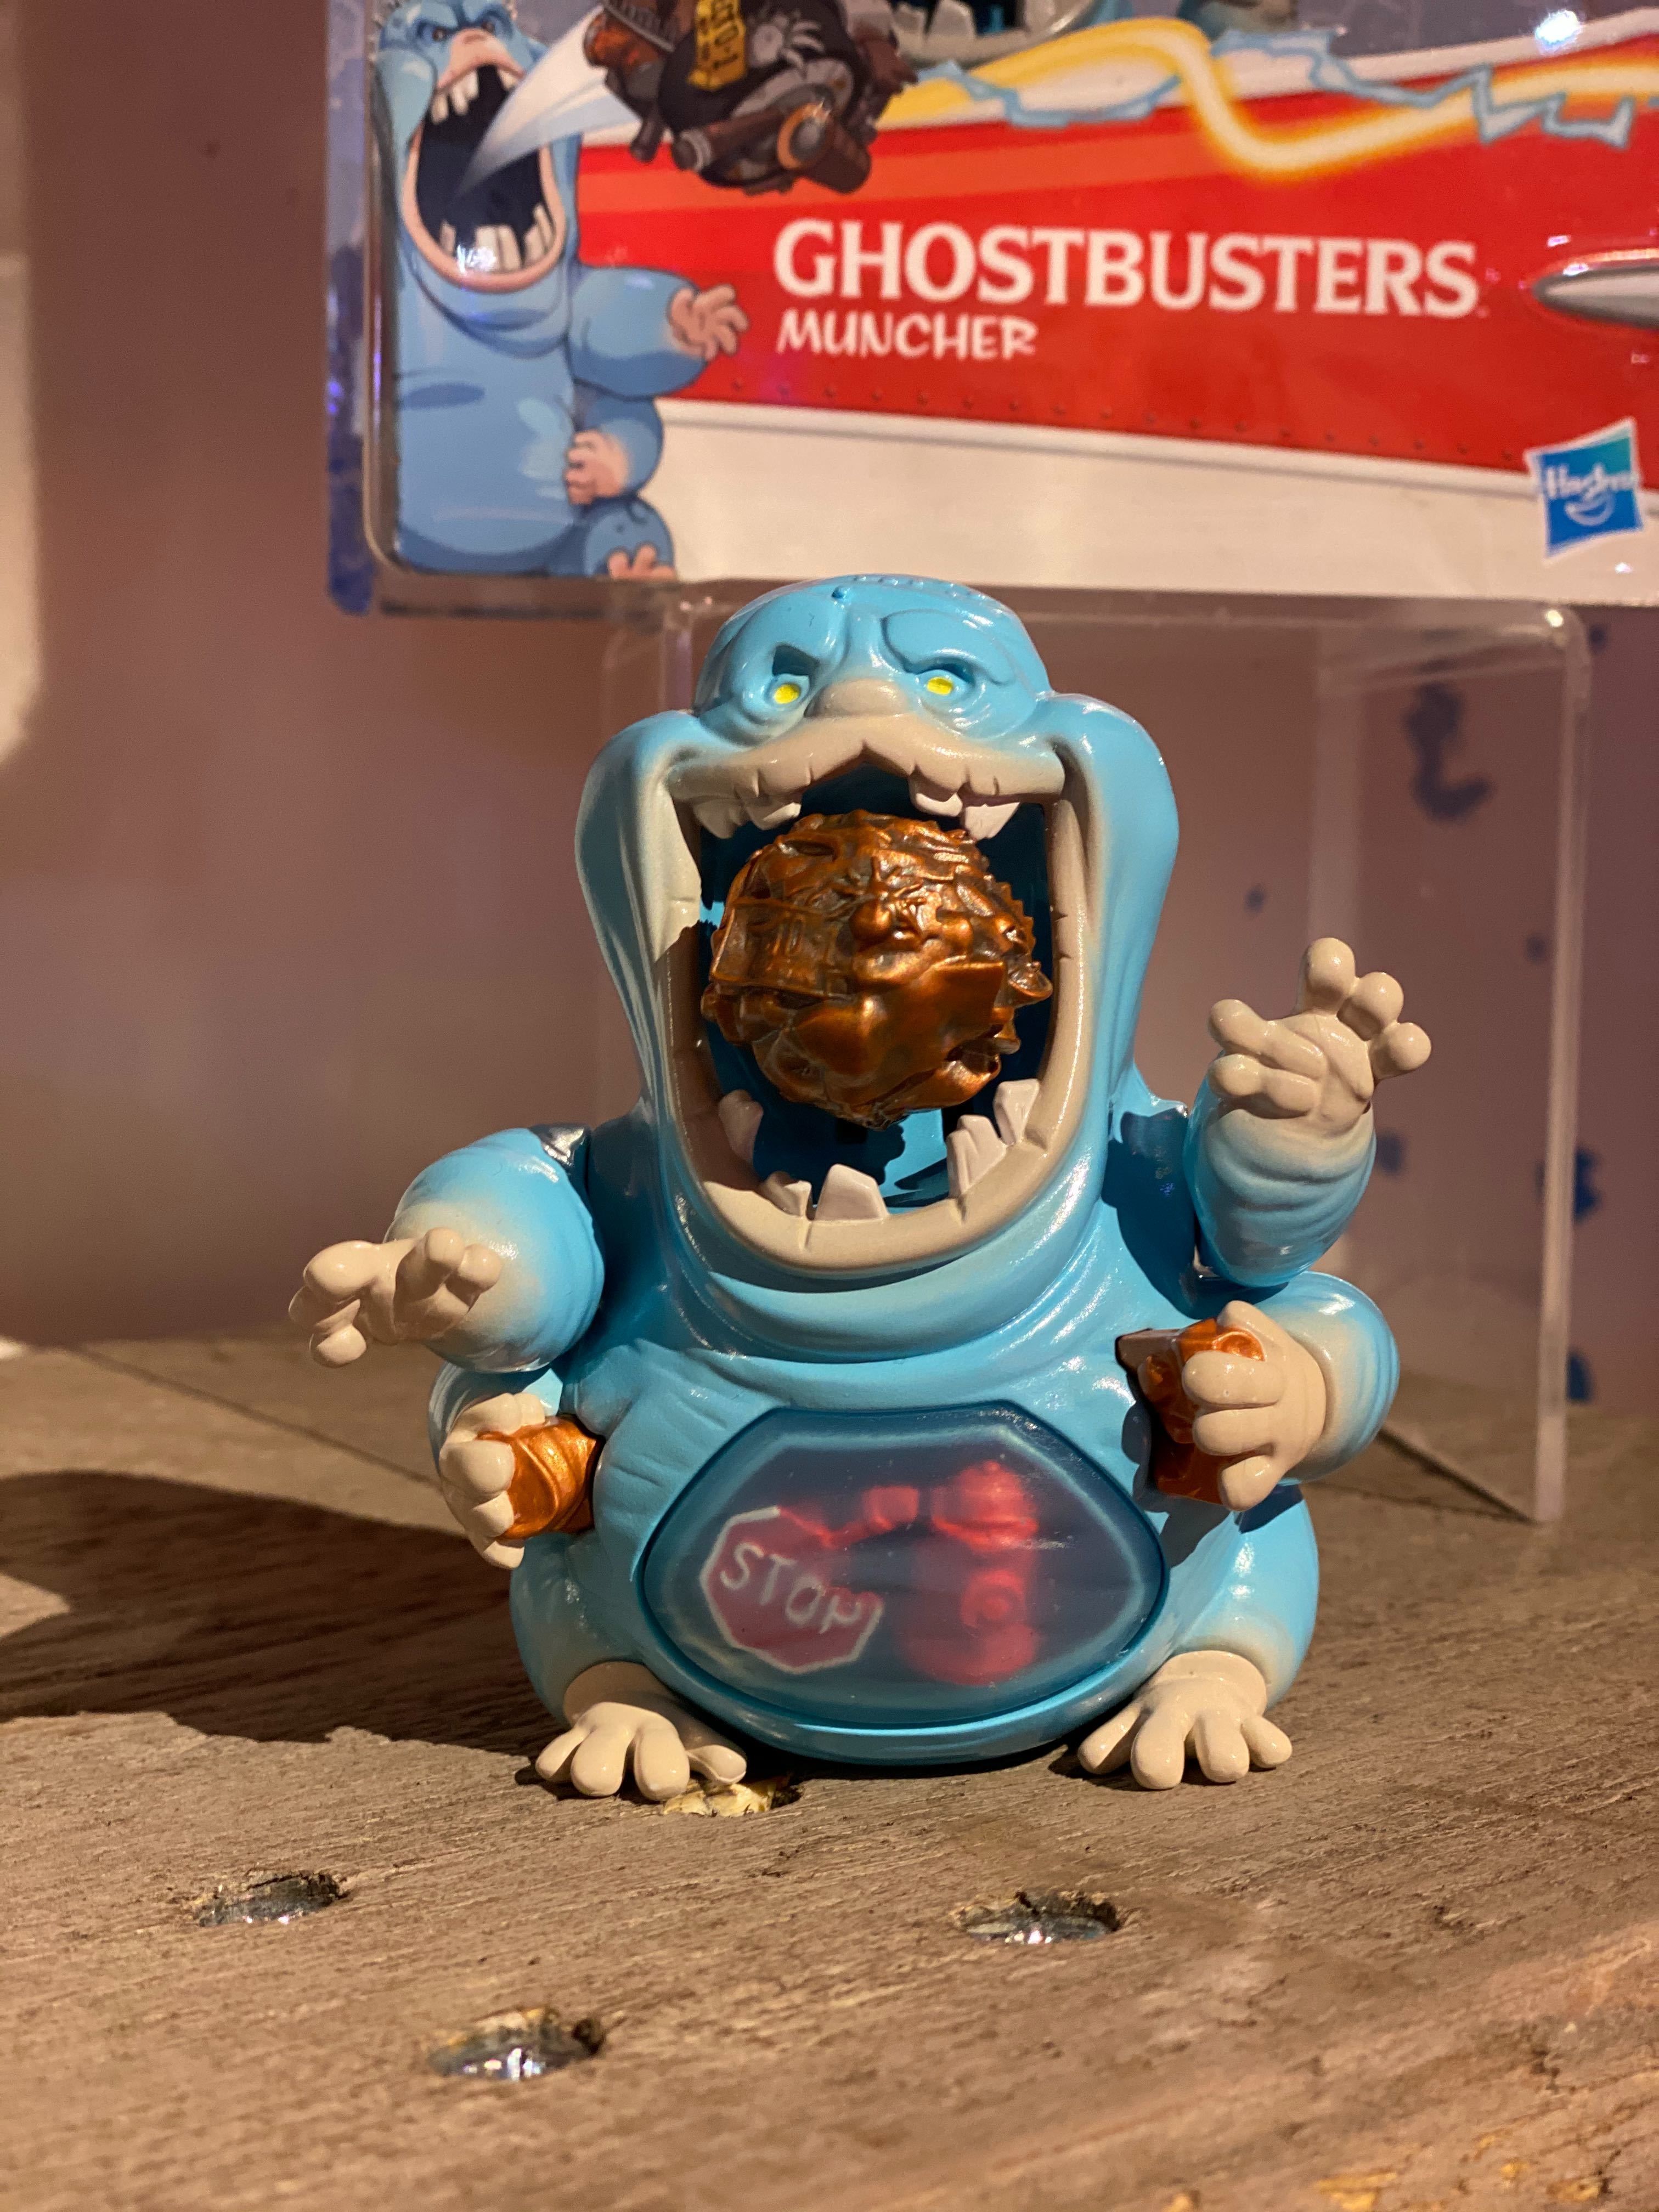 Ghostbusters: Afterlife Muncher action figure